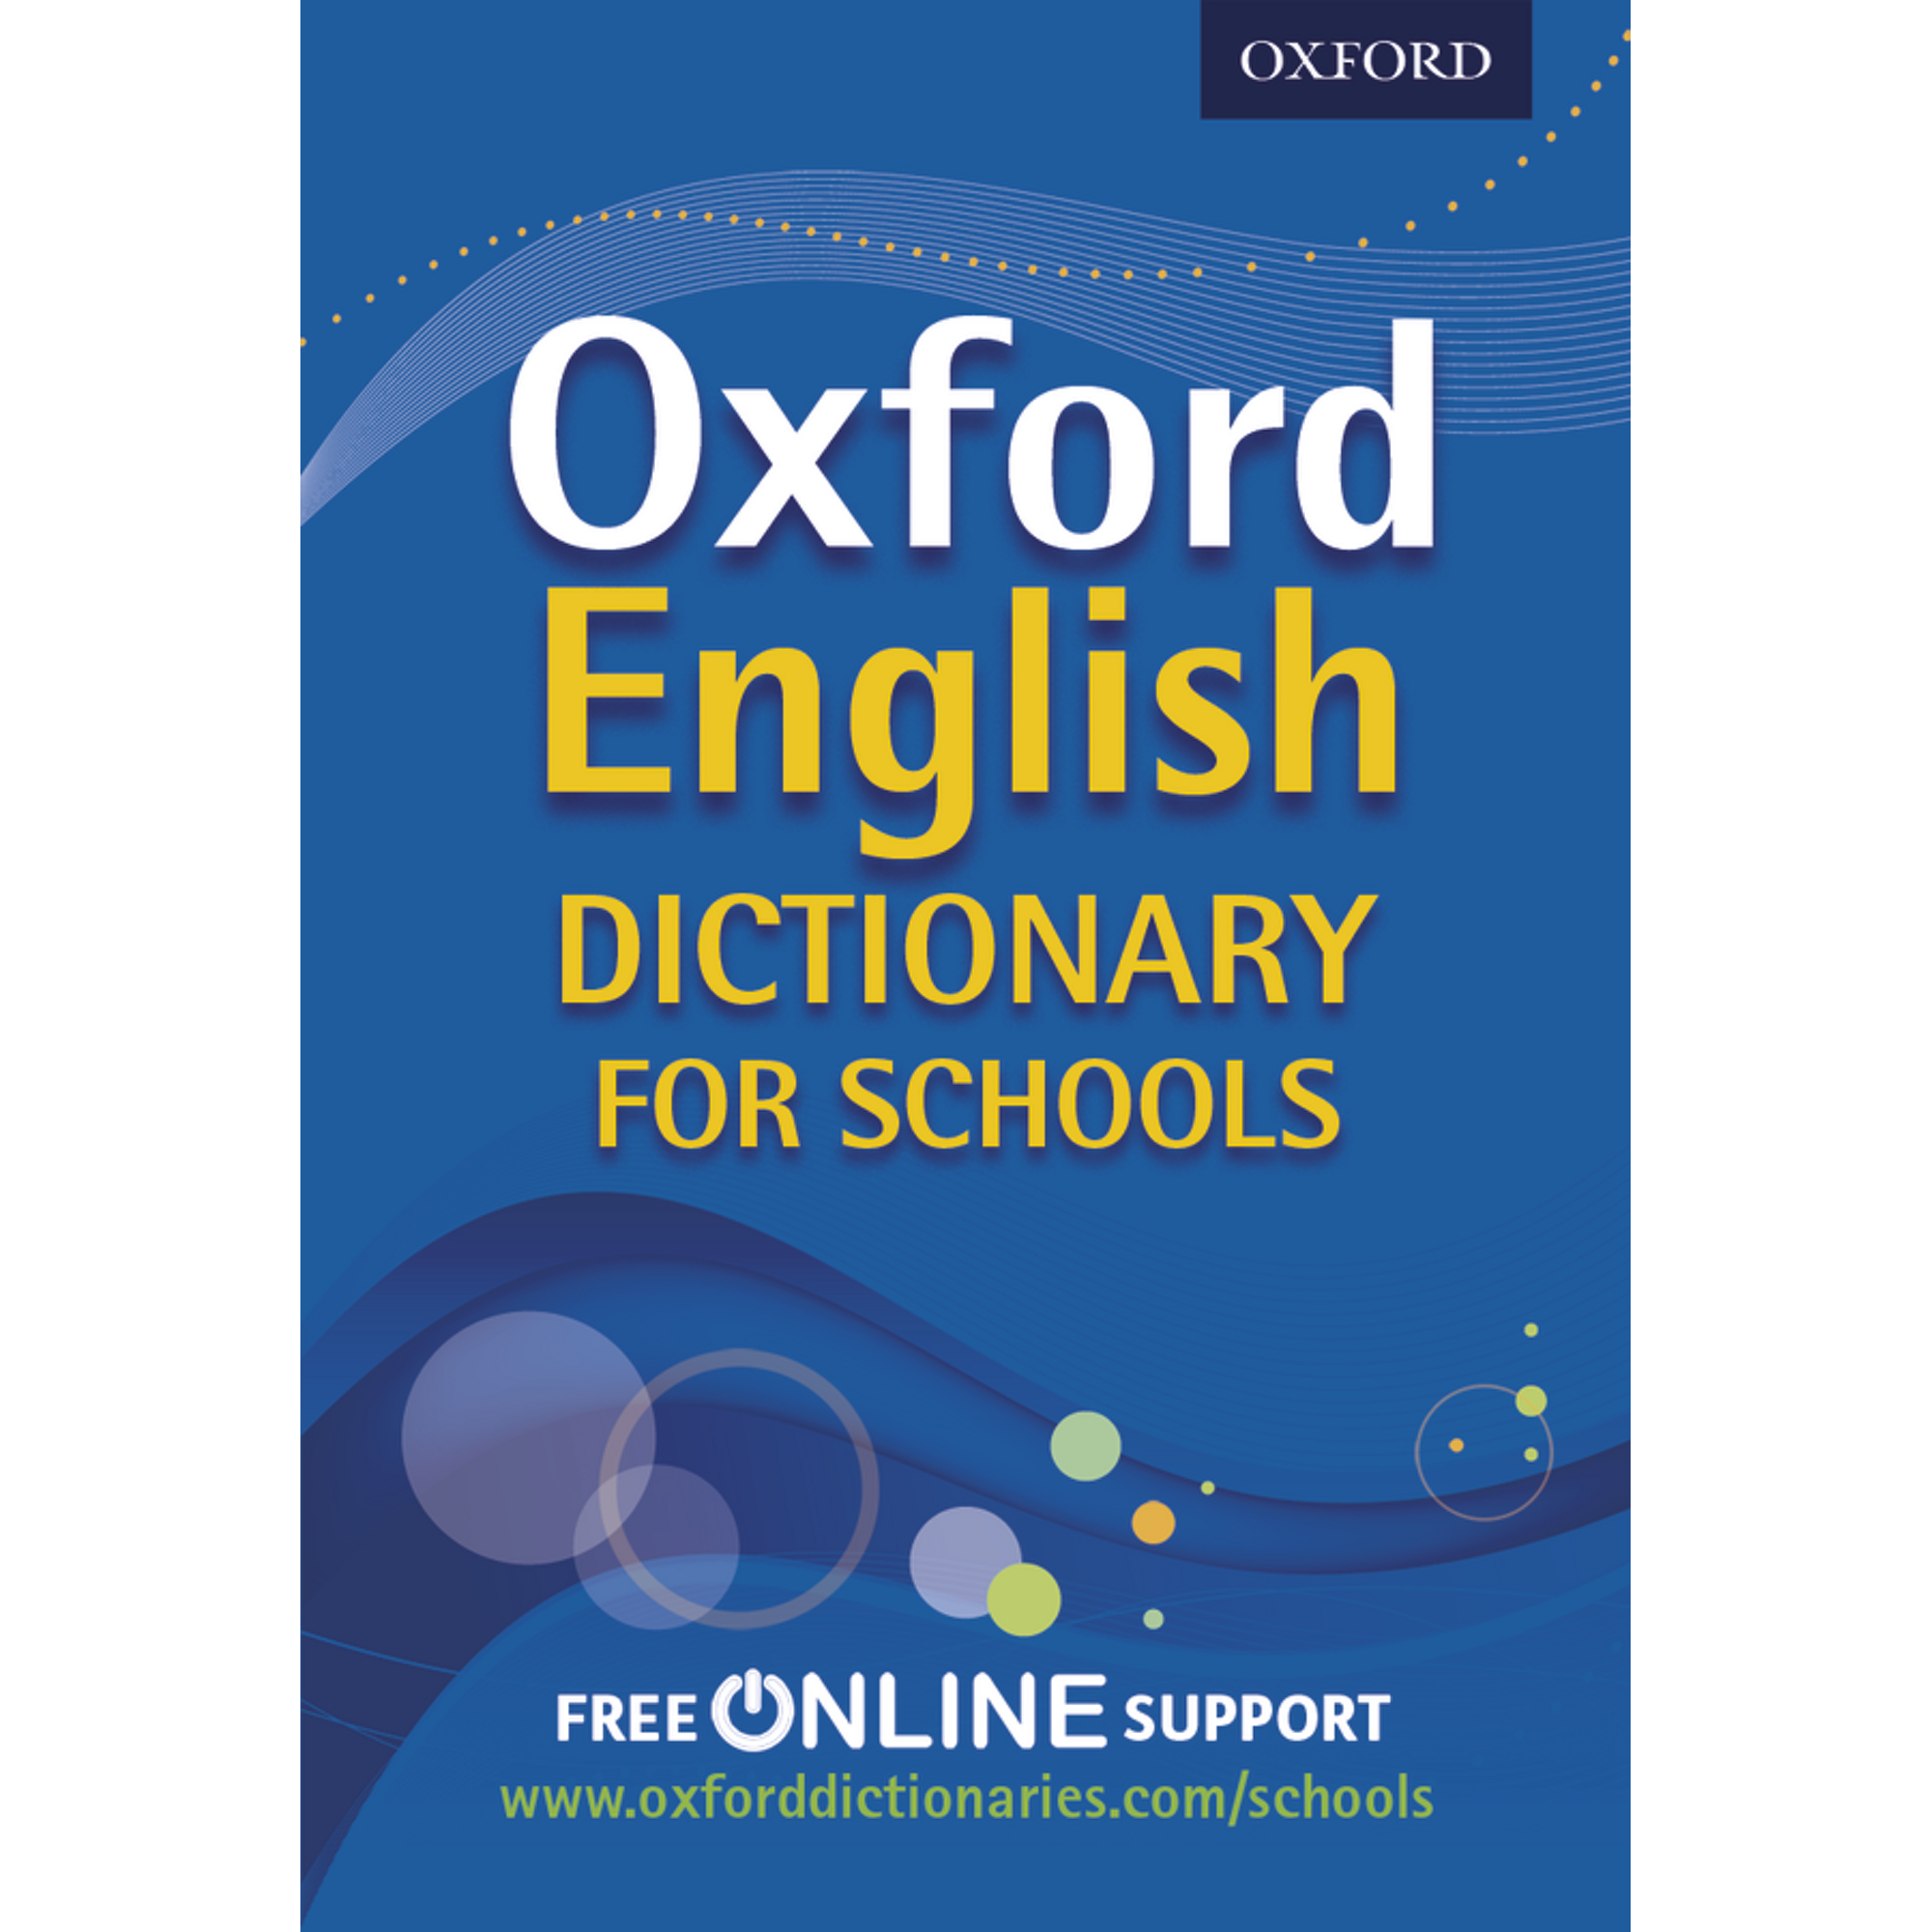 He1813022 - Oxford English Dictionary For Schools | Hope Education